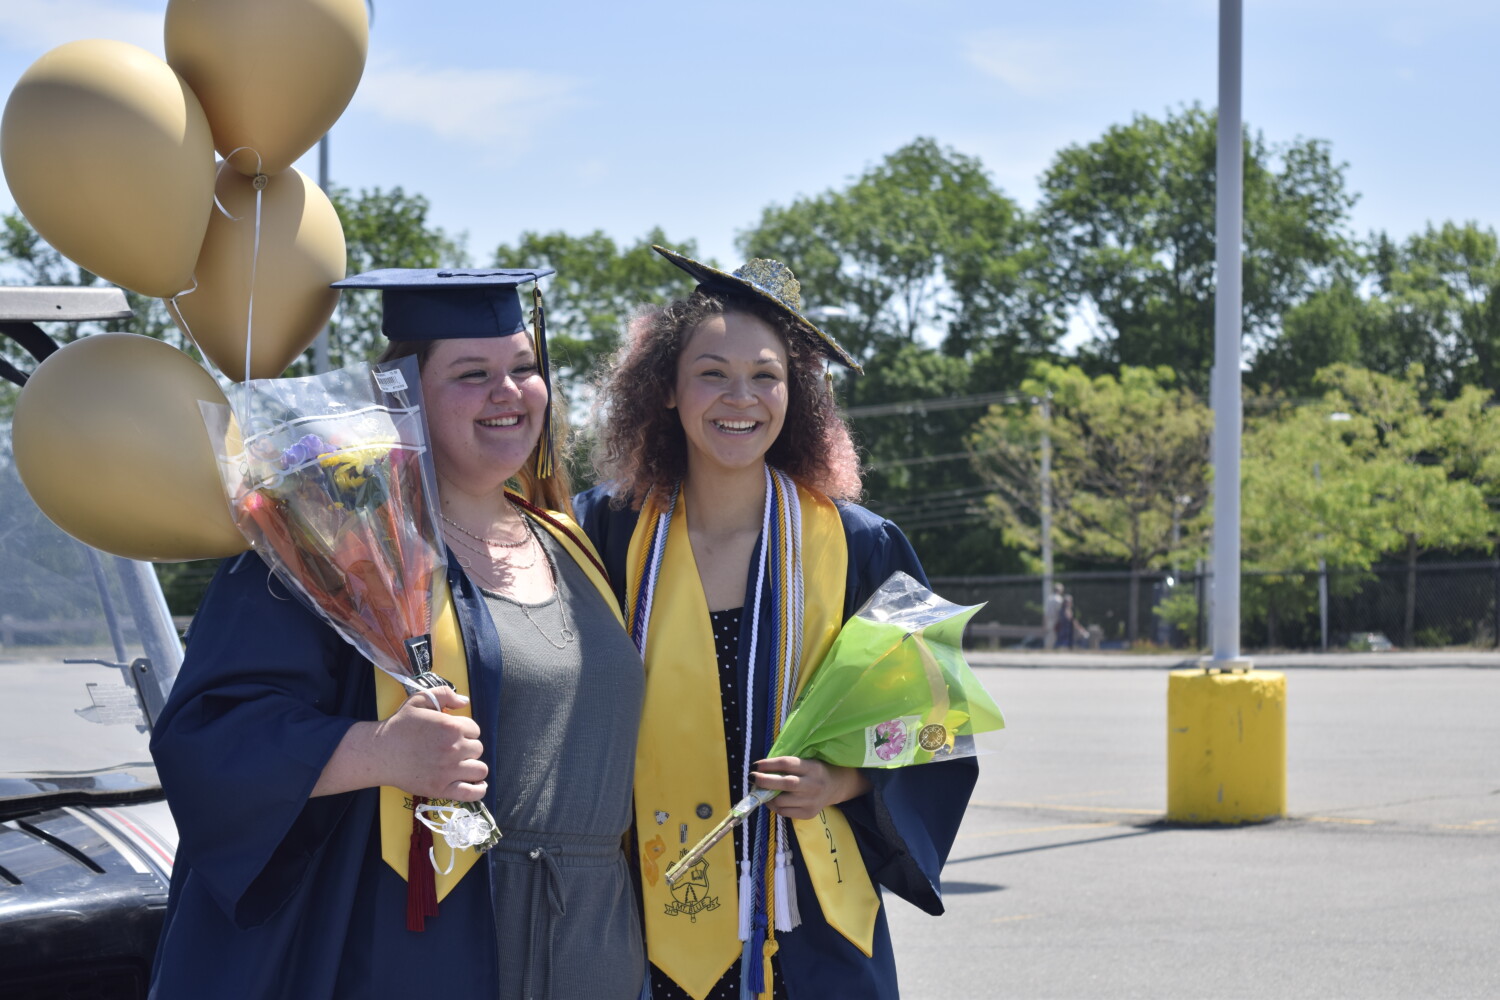 Two girls are smiling widely posing for a photo. one is wearing academic cords with a graduation robe and cap that has a crown glued on it. She is holding flowers. The girl to her right is wearing a plain graduation cap and holding gold balloons.